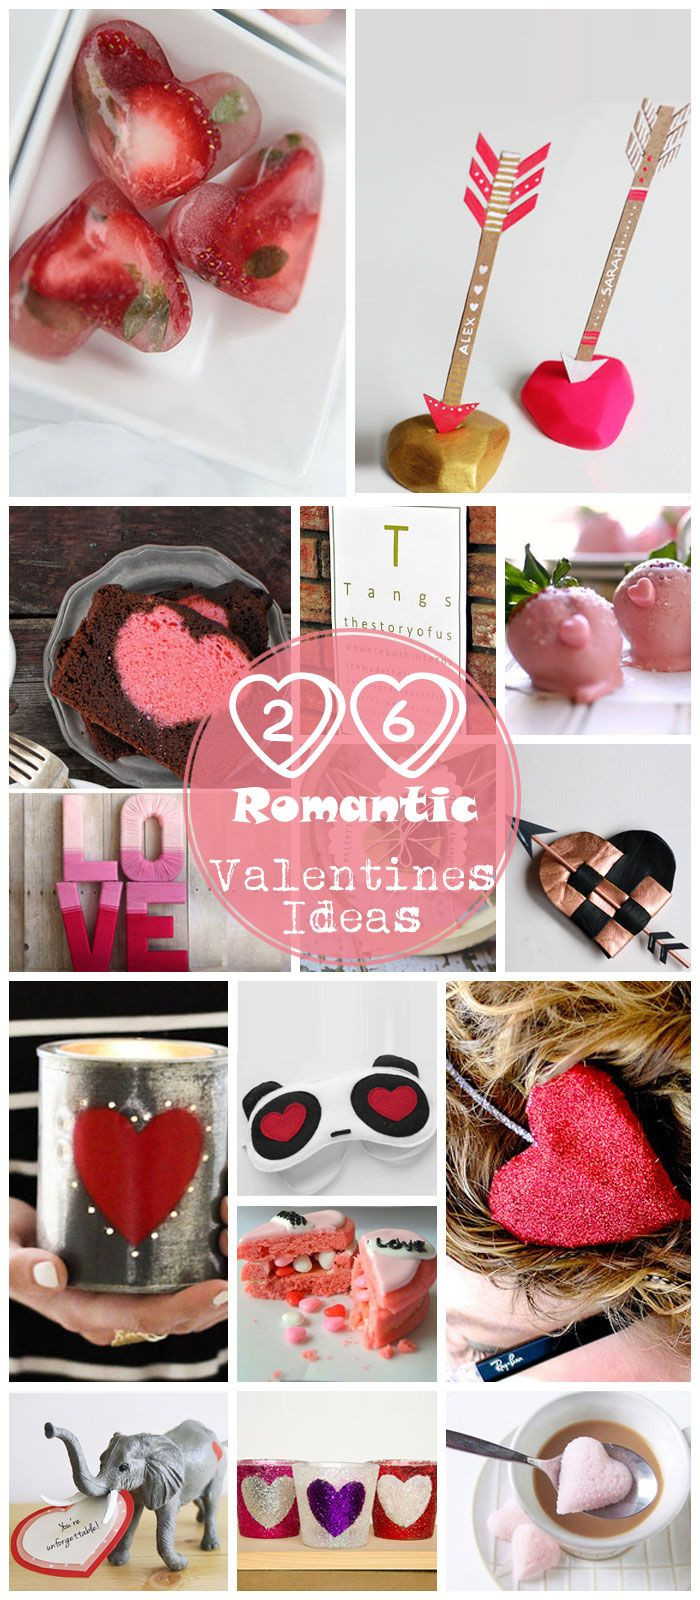 Valentines Gift Ideas For Him Pinterest
 Pick for 26 DIY Romantic Valentines Day Ideas for